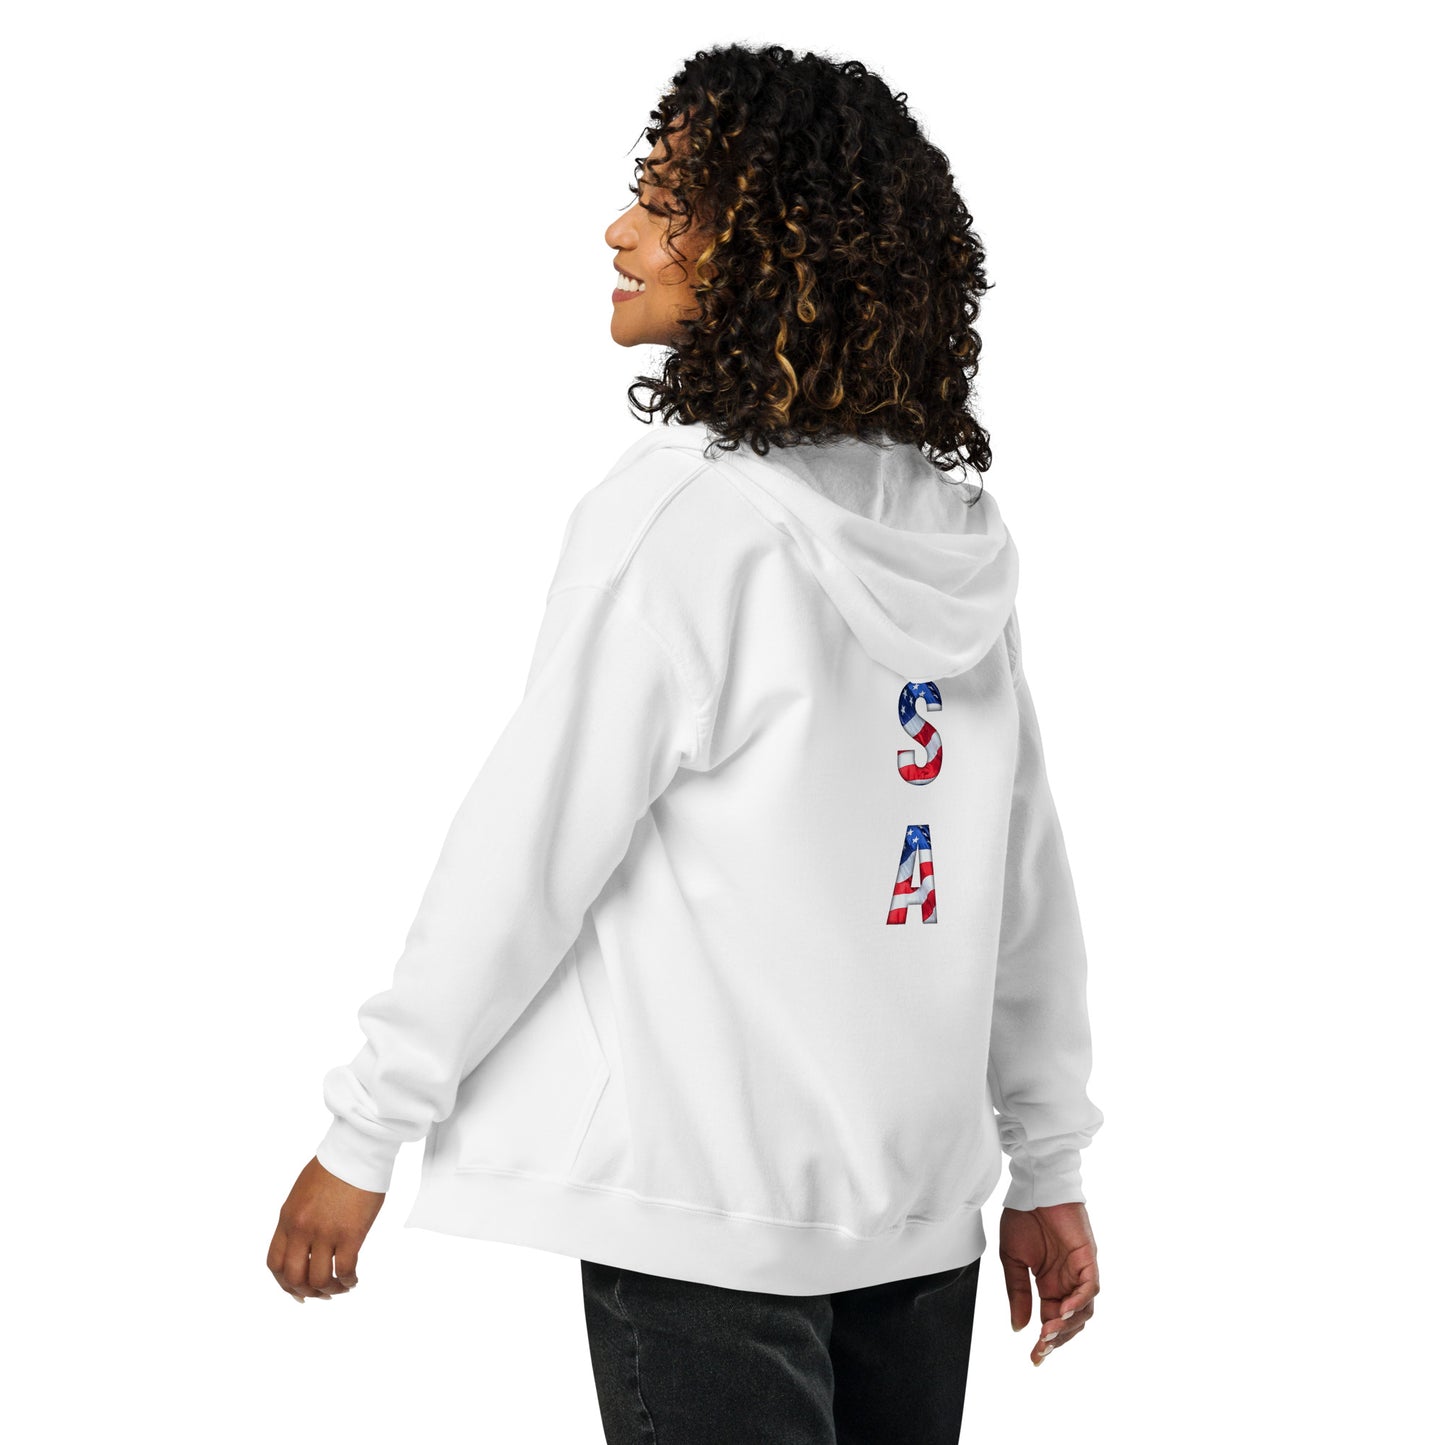 USA Themed Stars and Strips DTG Unisex heavy blend zip hoodie CedarHill Country Market